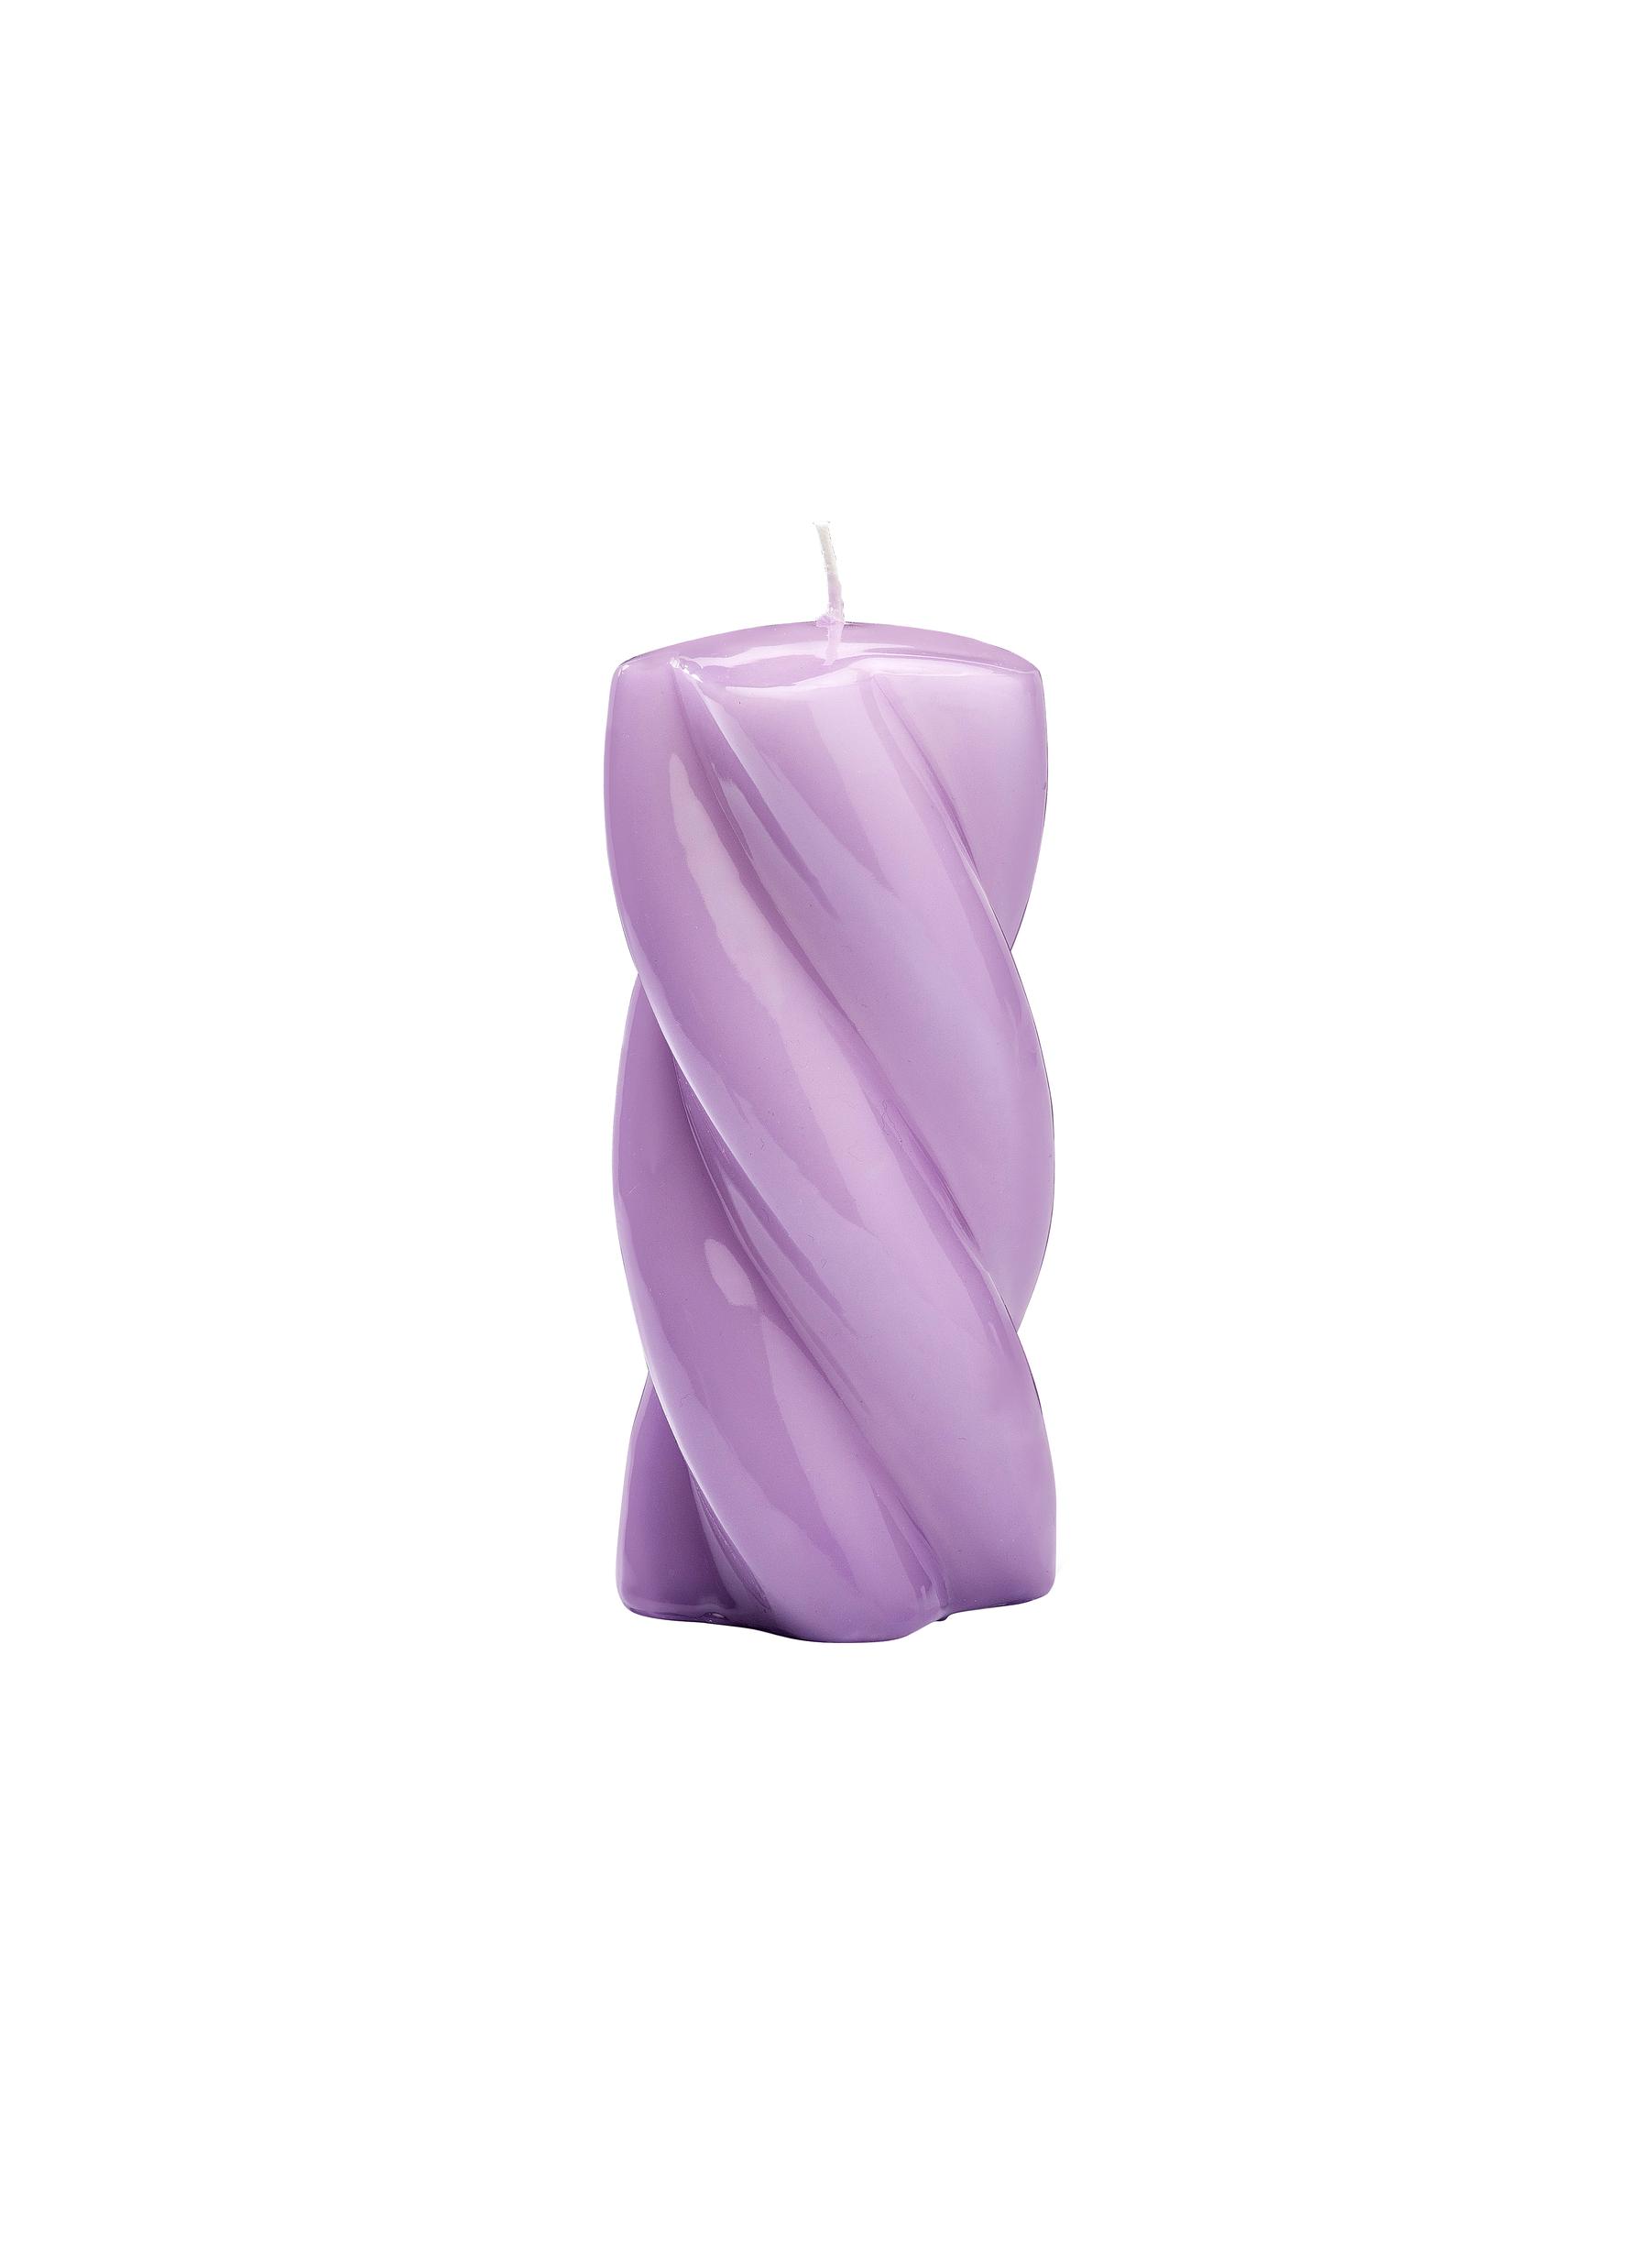 Anna + Nina Blunt Twisted Long Candle - Lilac